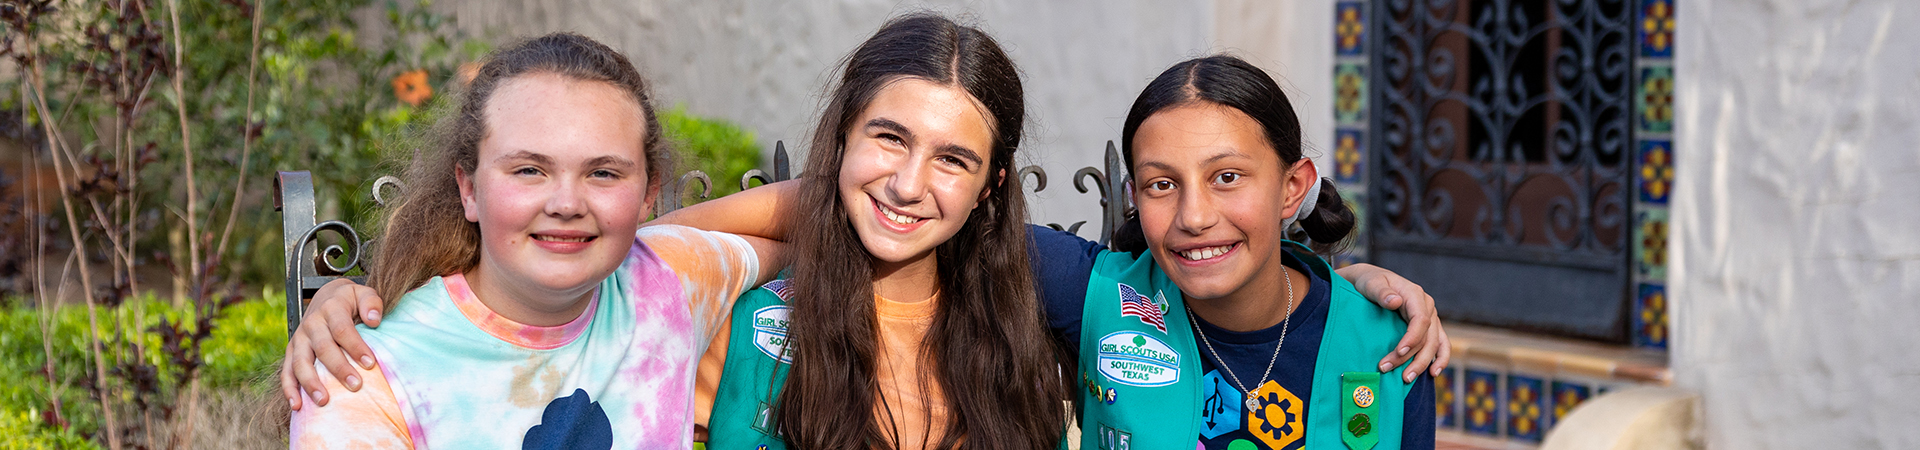  three girl scout friends posing and smiling 